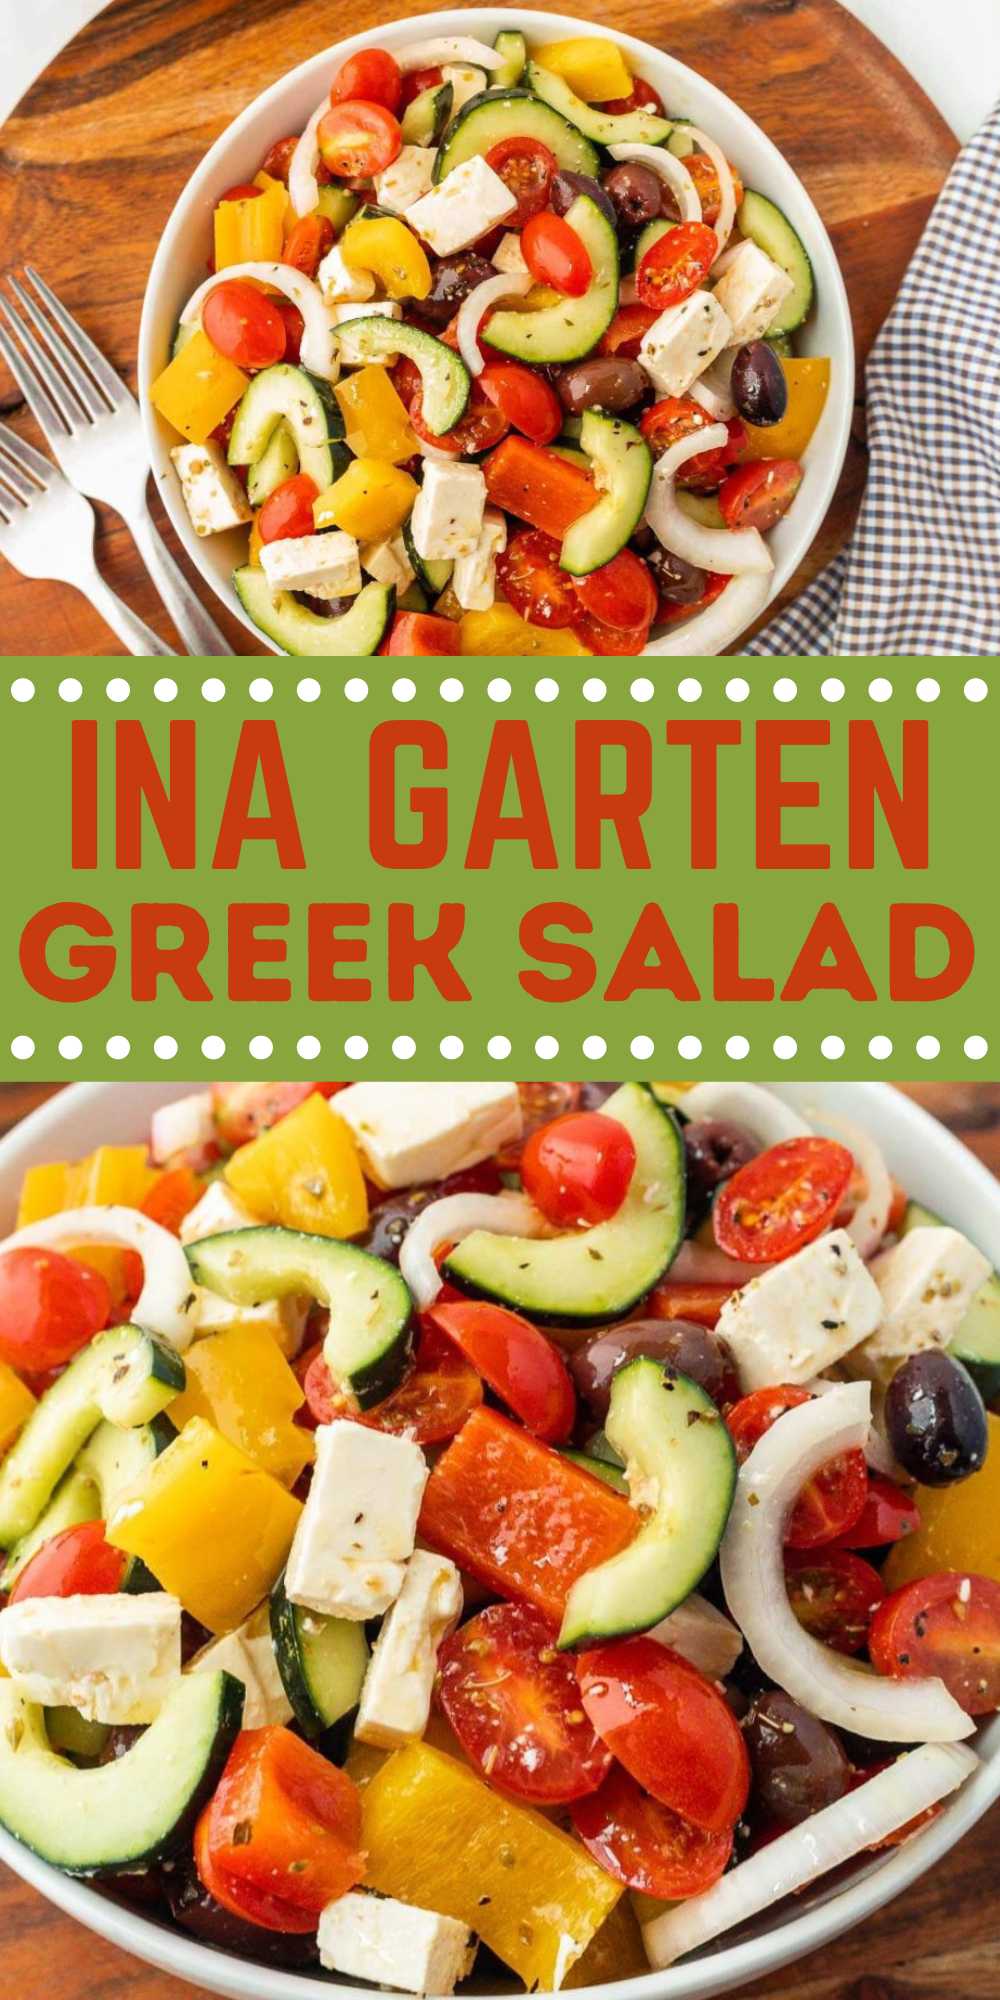 This Ina Garten Greek Salad is a healthy and delicious salad. This Barefoot Contessa copycat recipe is loaded with flavor and easy to make. This salad is light, refreshing and delicious and full of crunchy vegetables. #eatingonadime #inagartengreeksalad #greeksalad #barefootcontessasalad